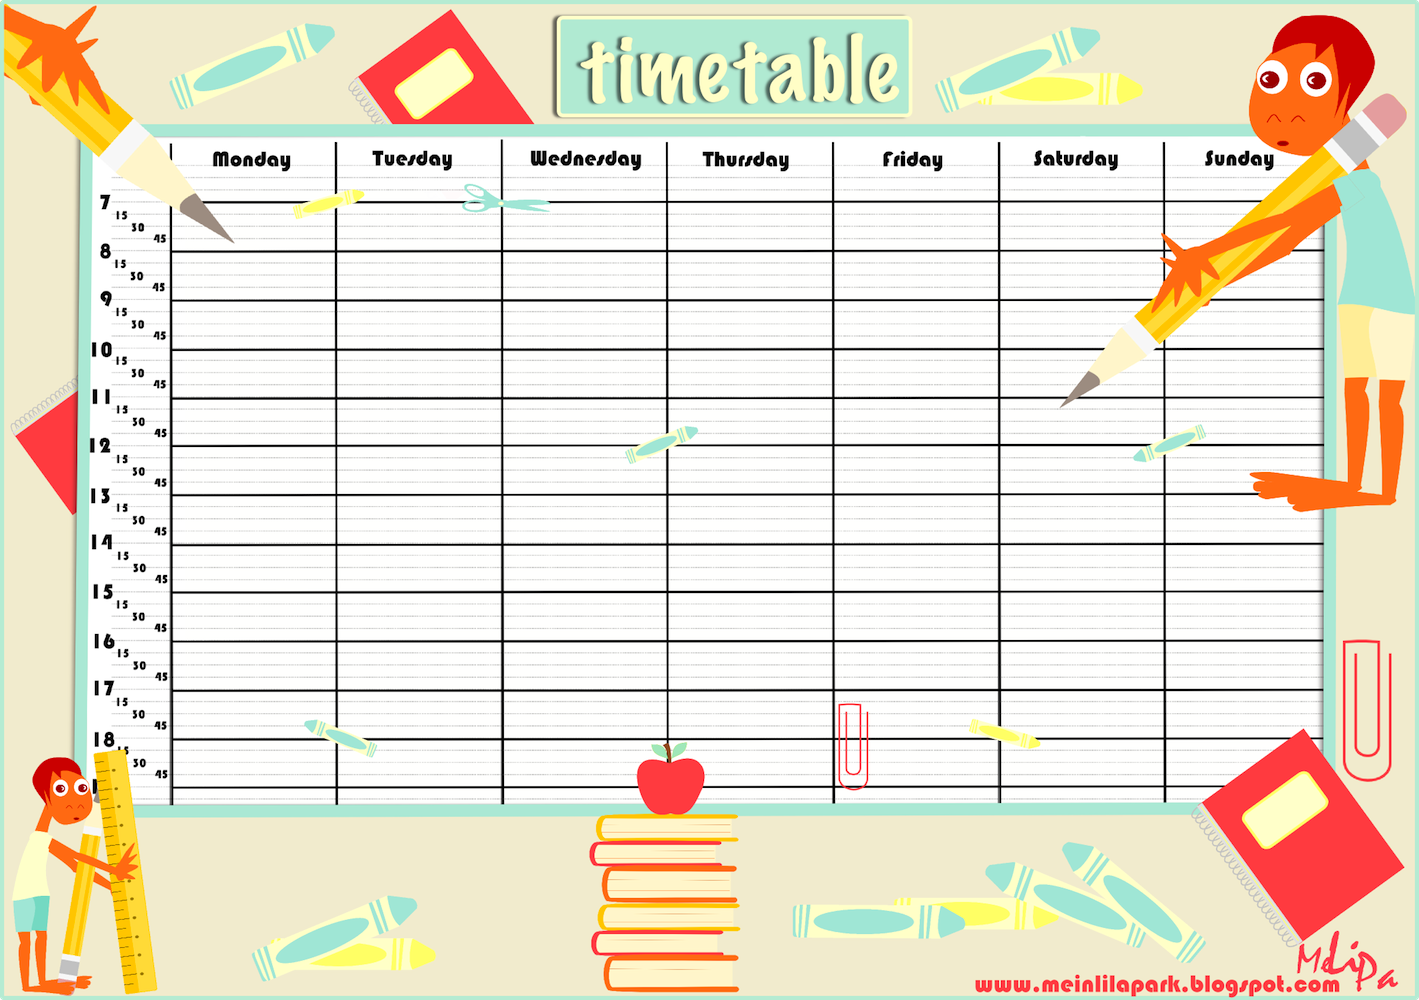 Schedule Printable Images Gallery Category Page 2